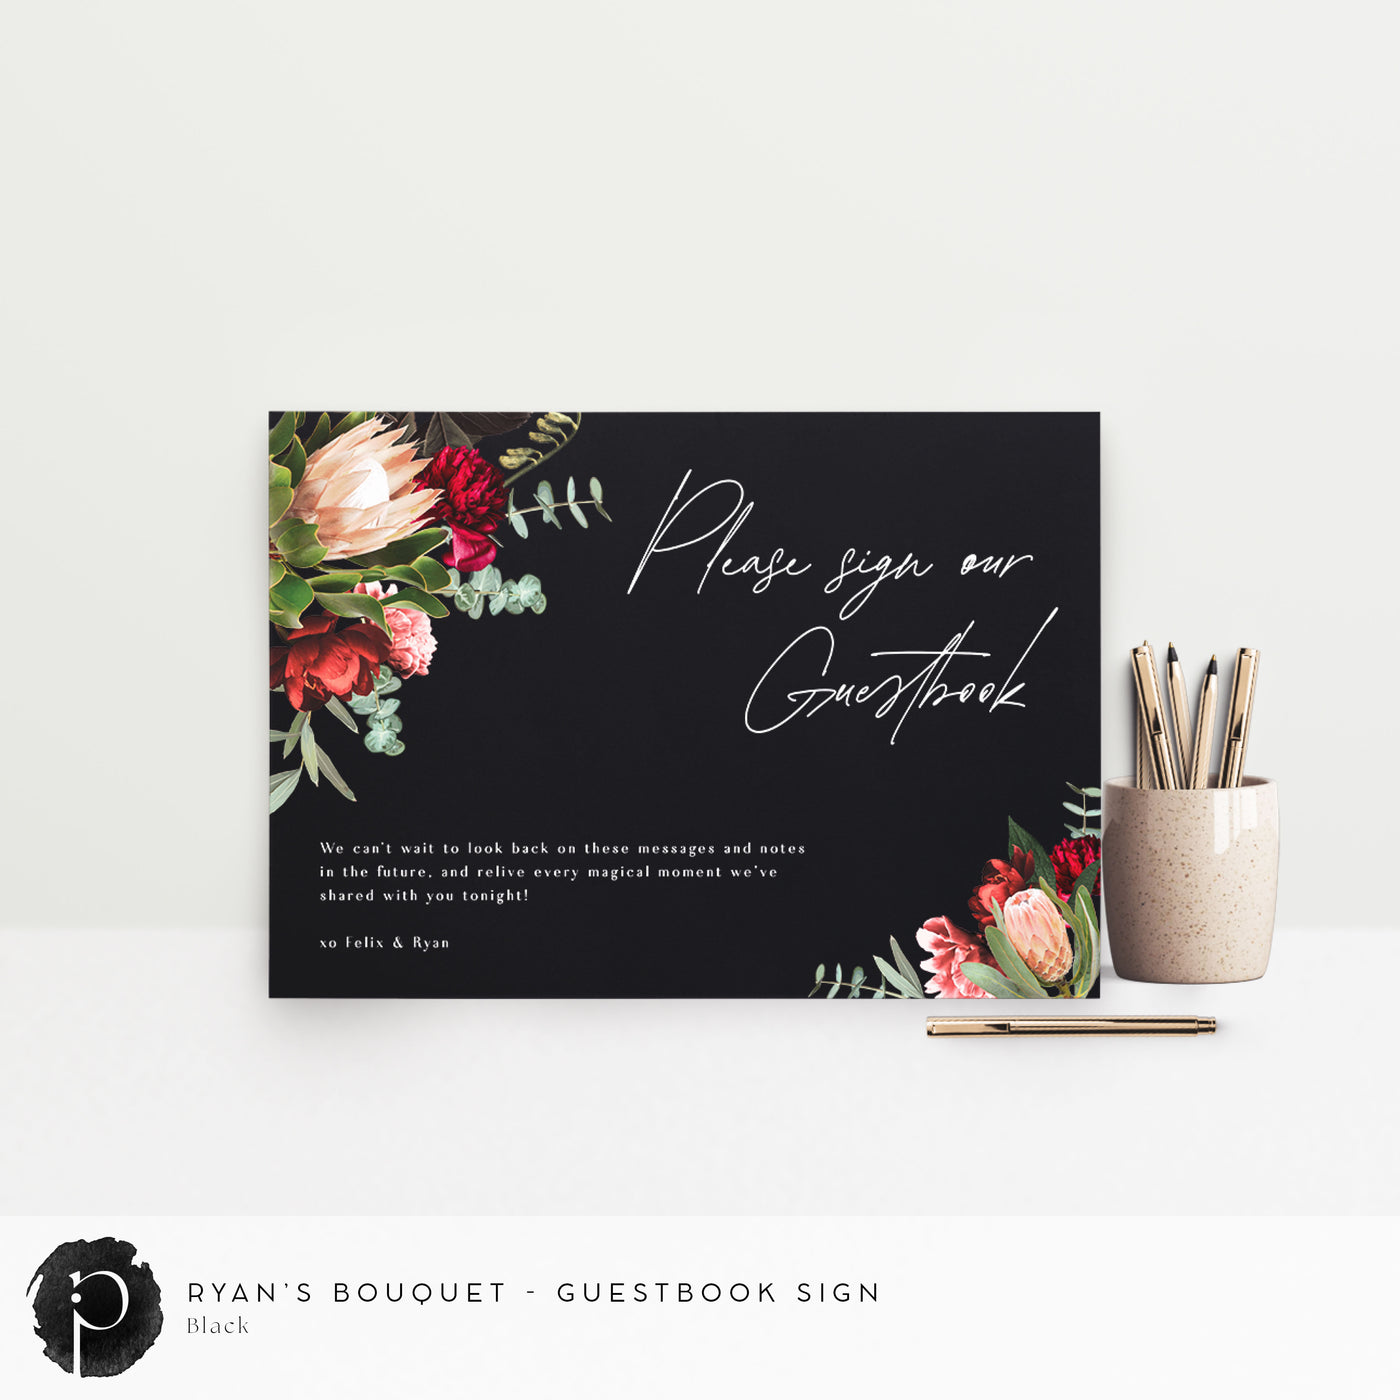 Ryan's Bouquet - Guestbook Sign